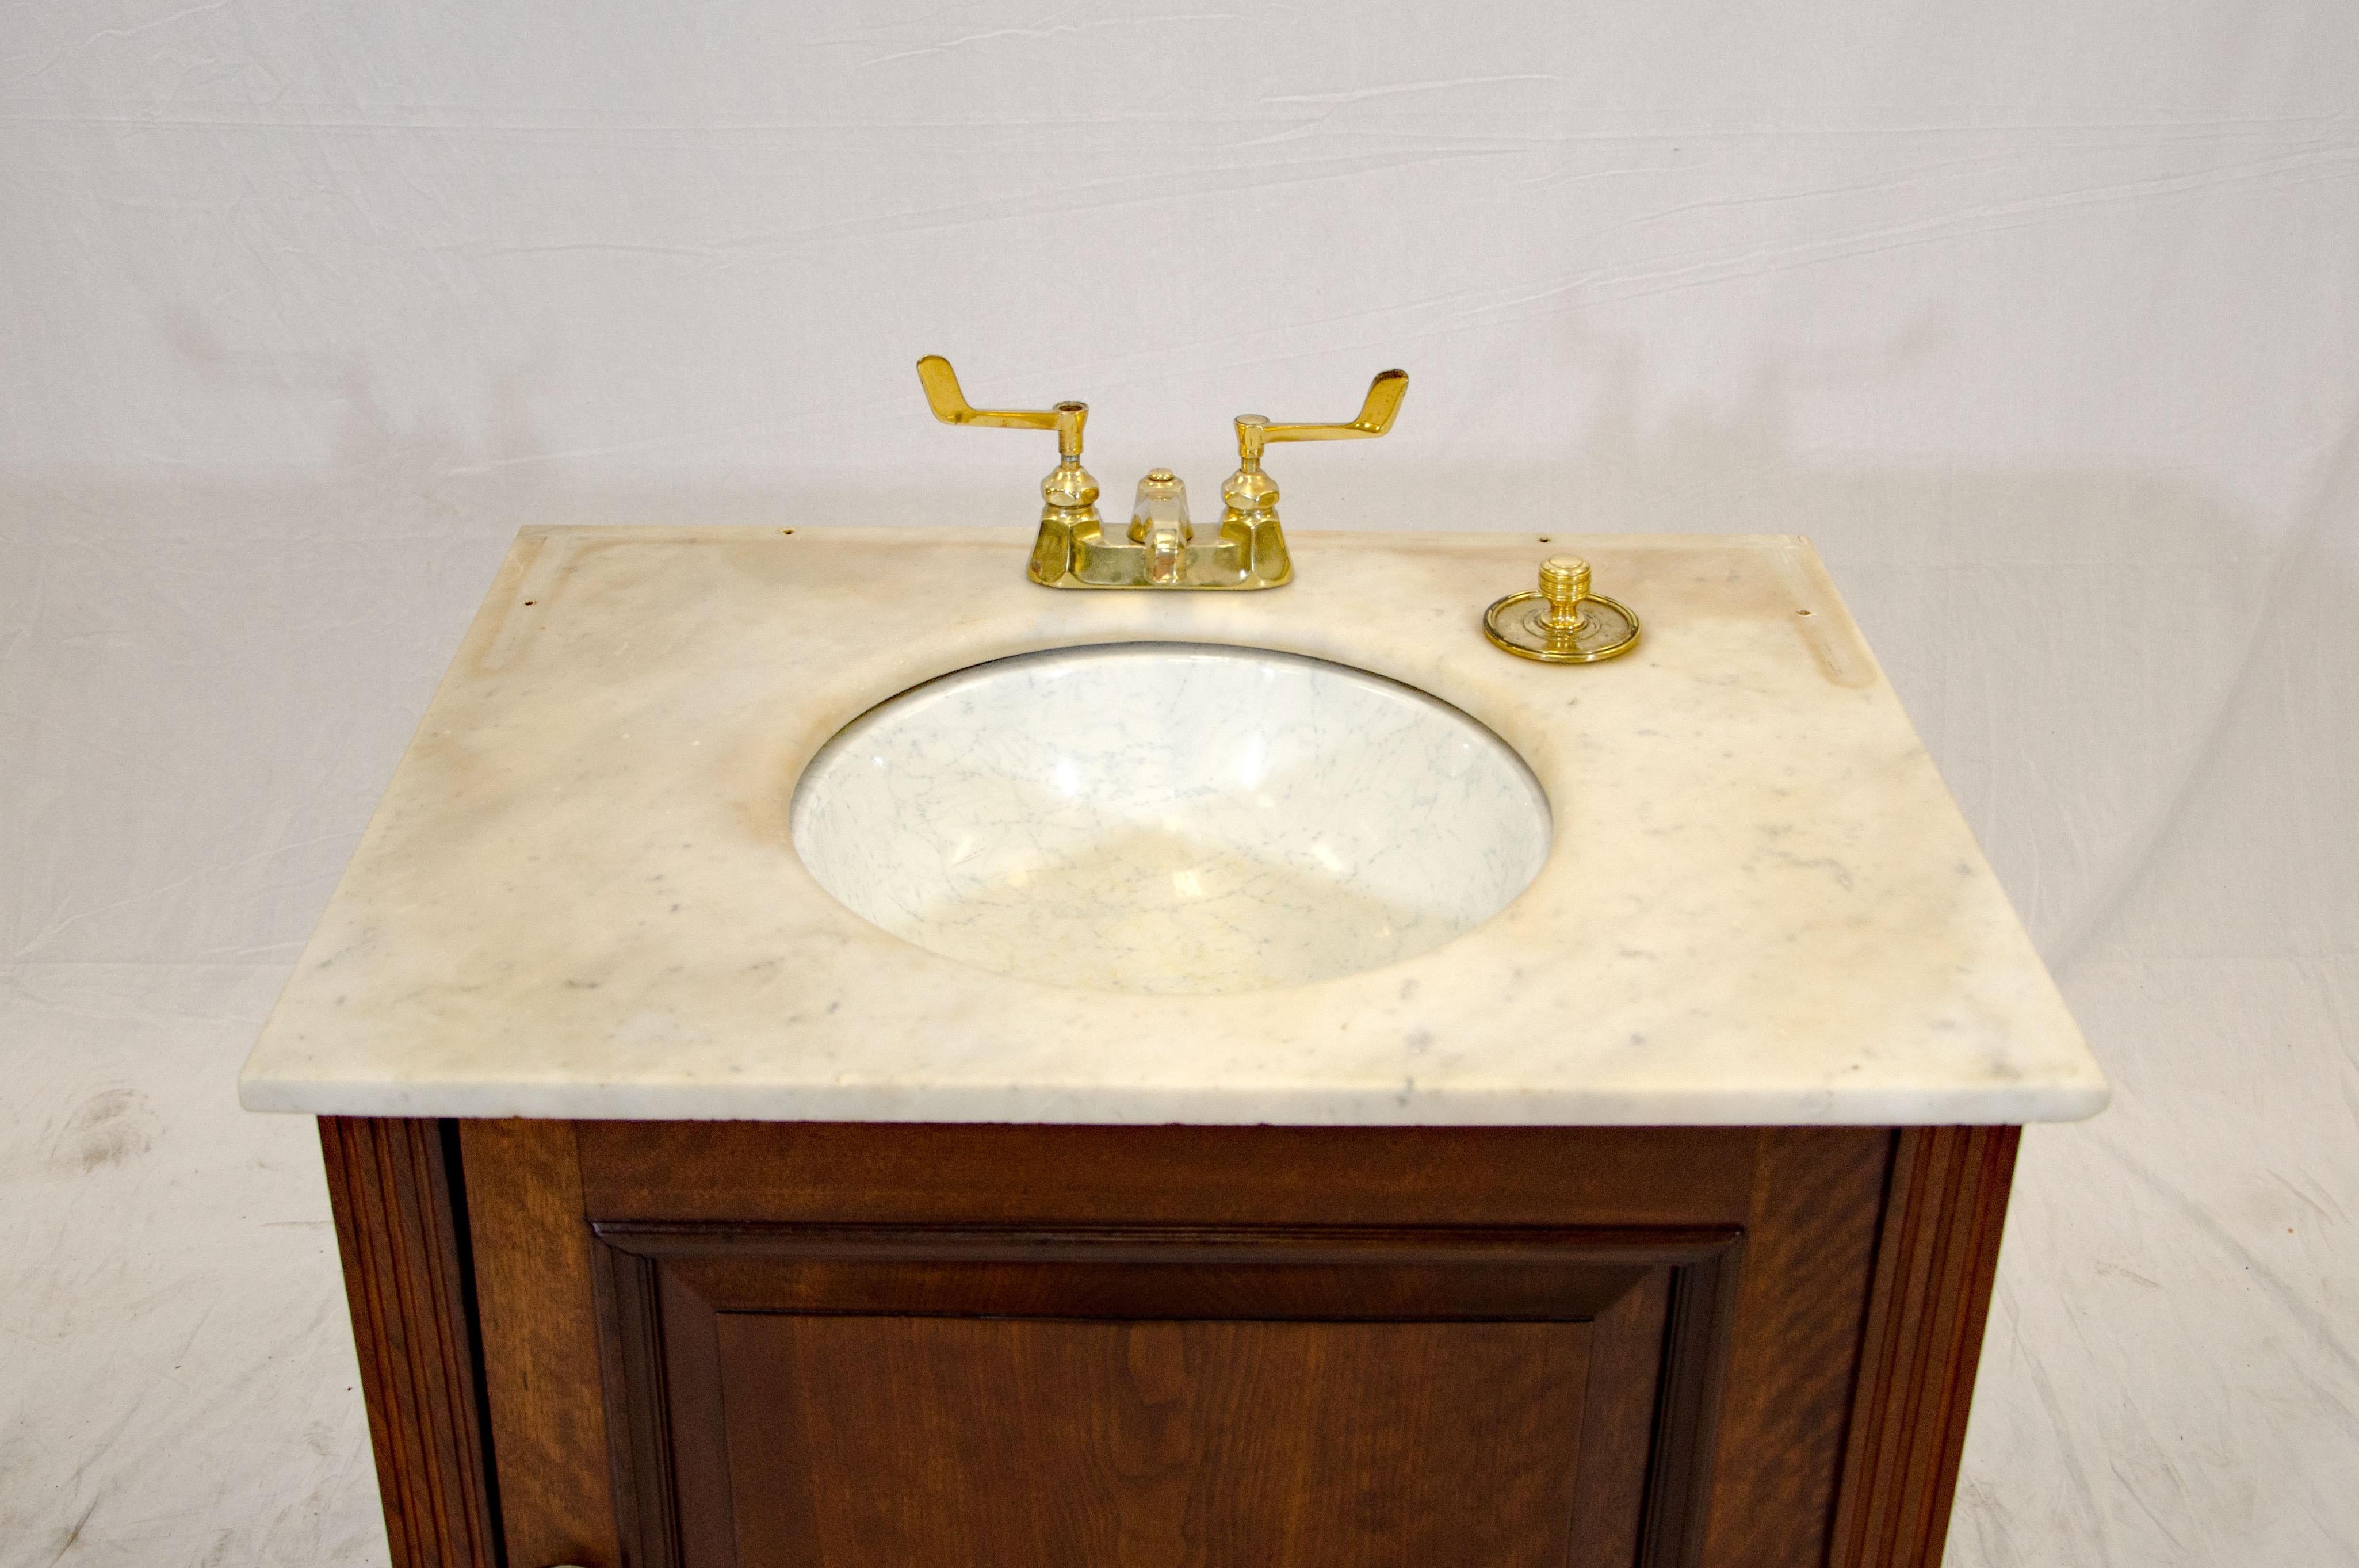 20th Century Victorian Marble-Top Cabinet with Sink